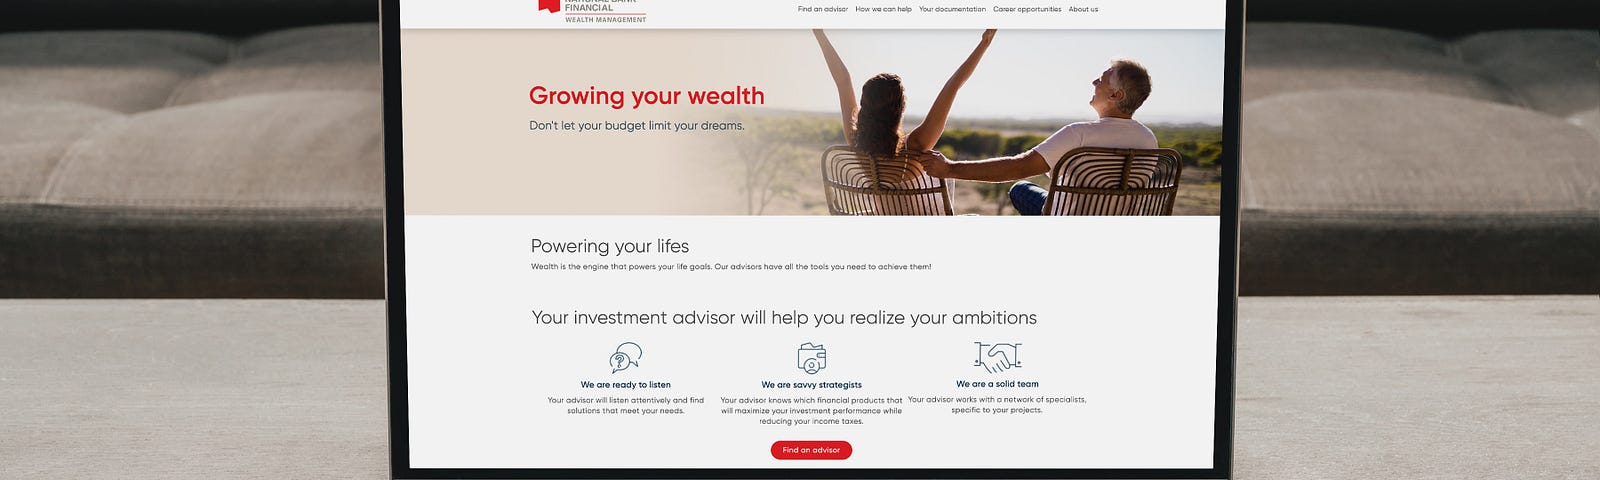 Computer monitor with woman raising arms, man next to her, phrase “Growing your wealth”